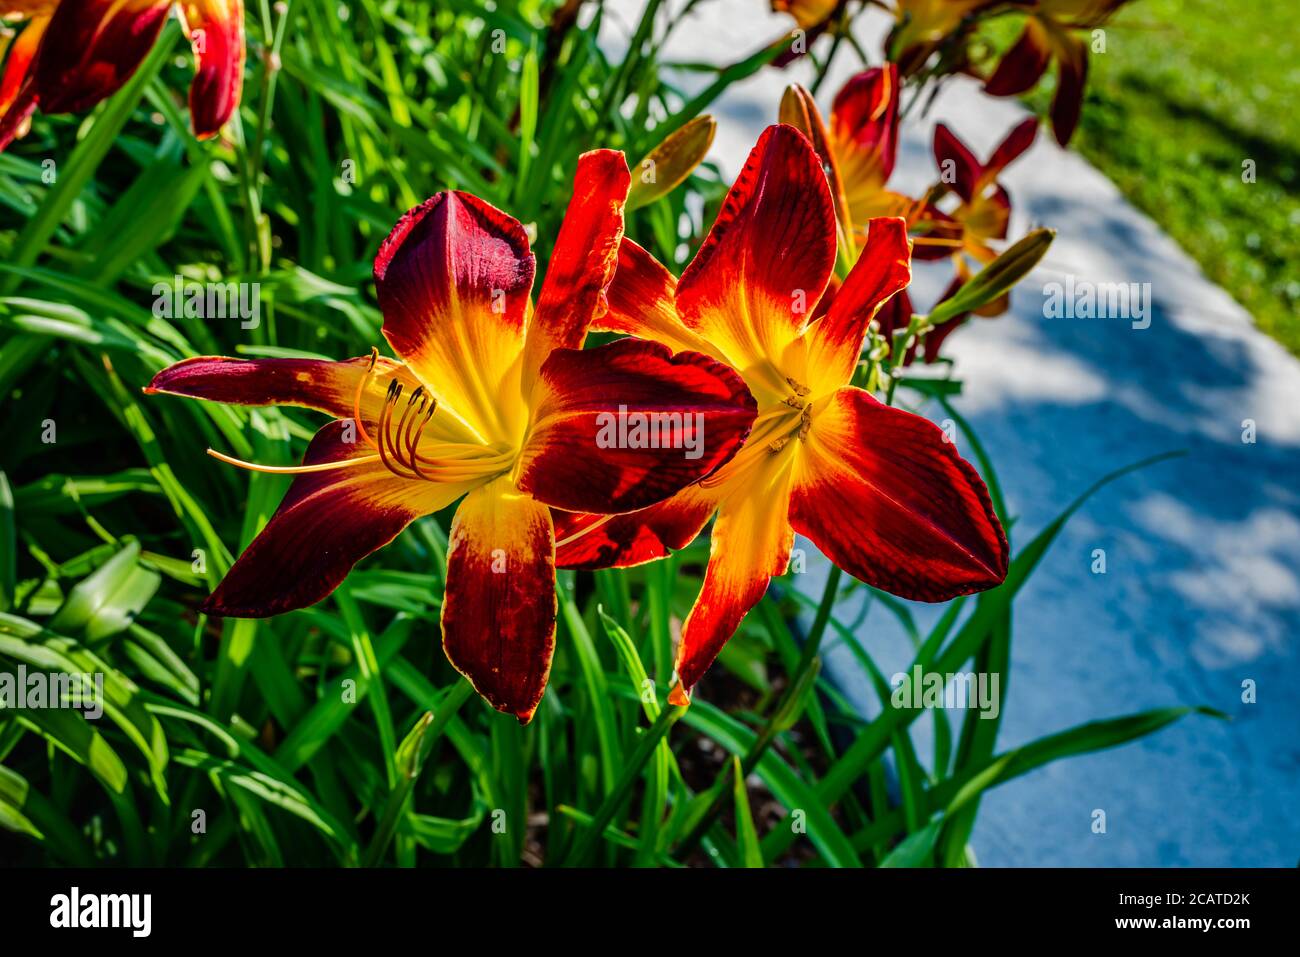 Lily flowers in the garden Stock Photo